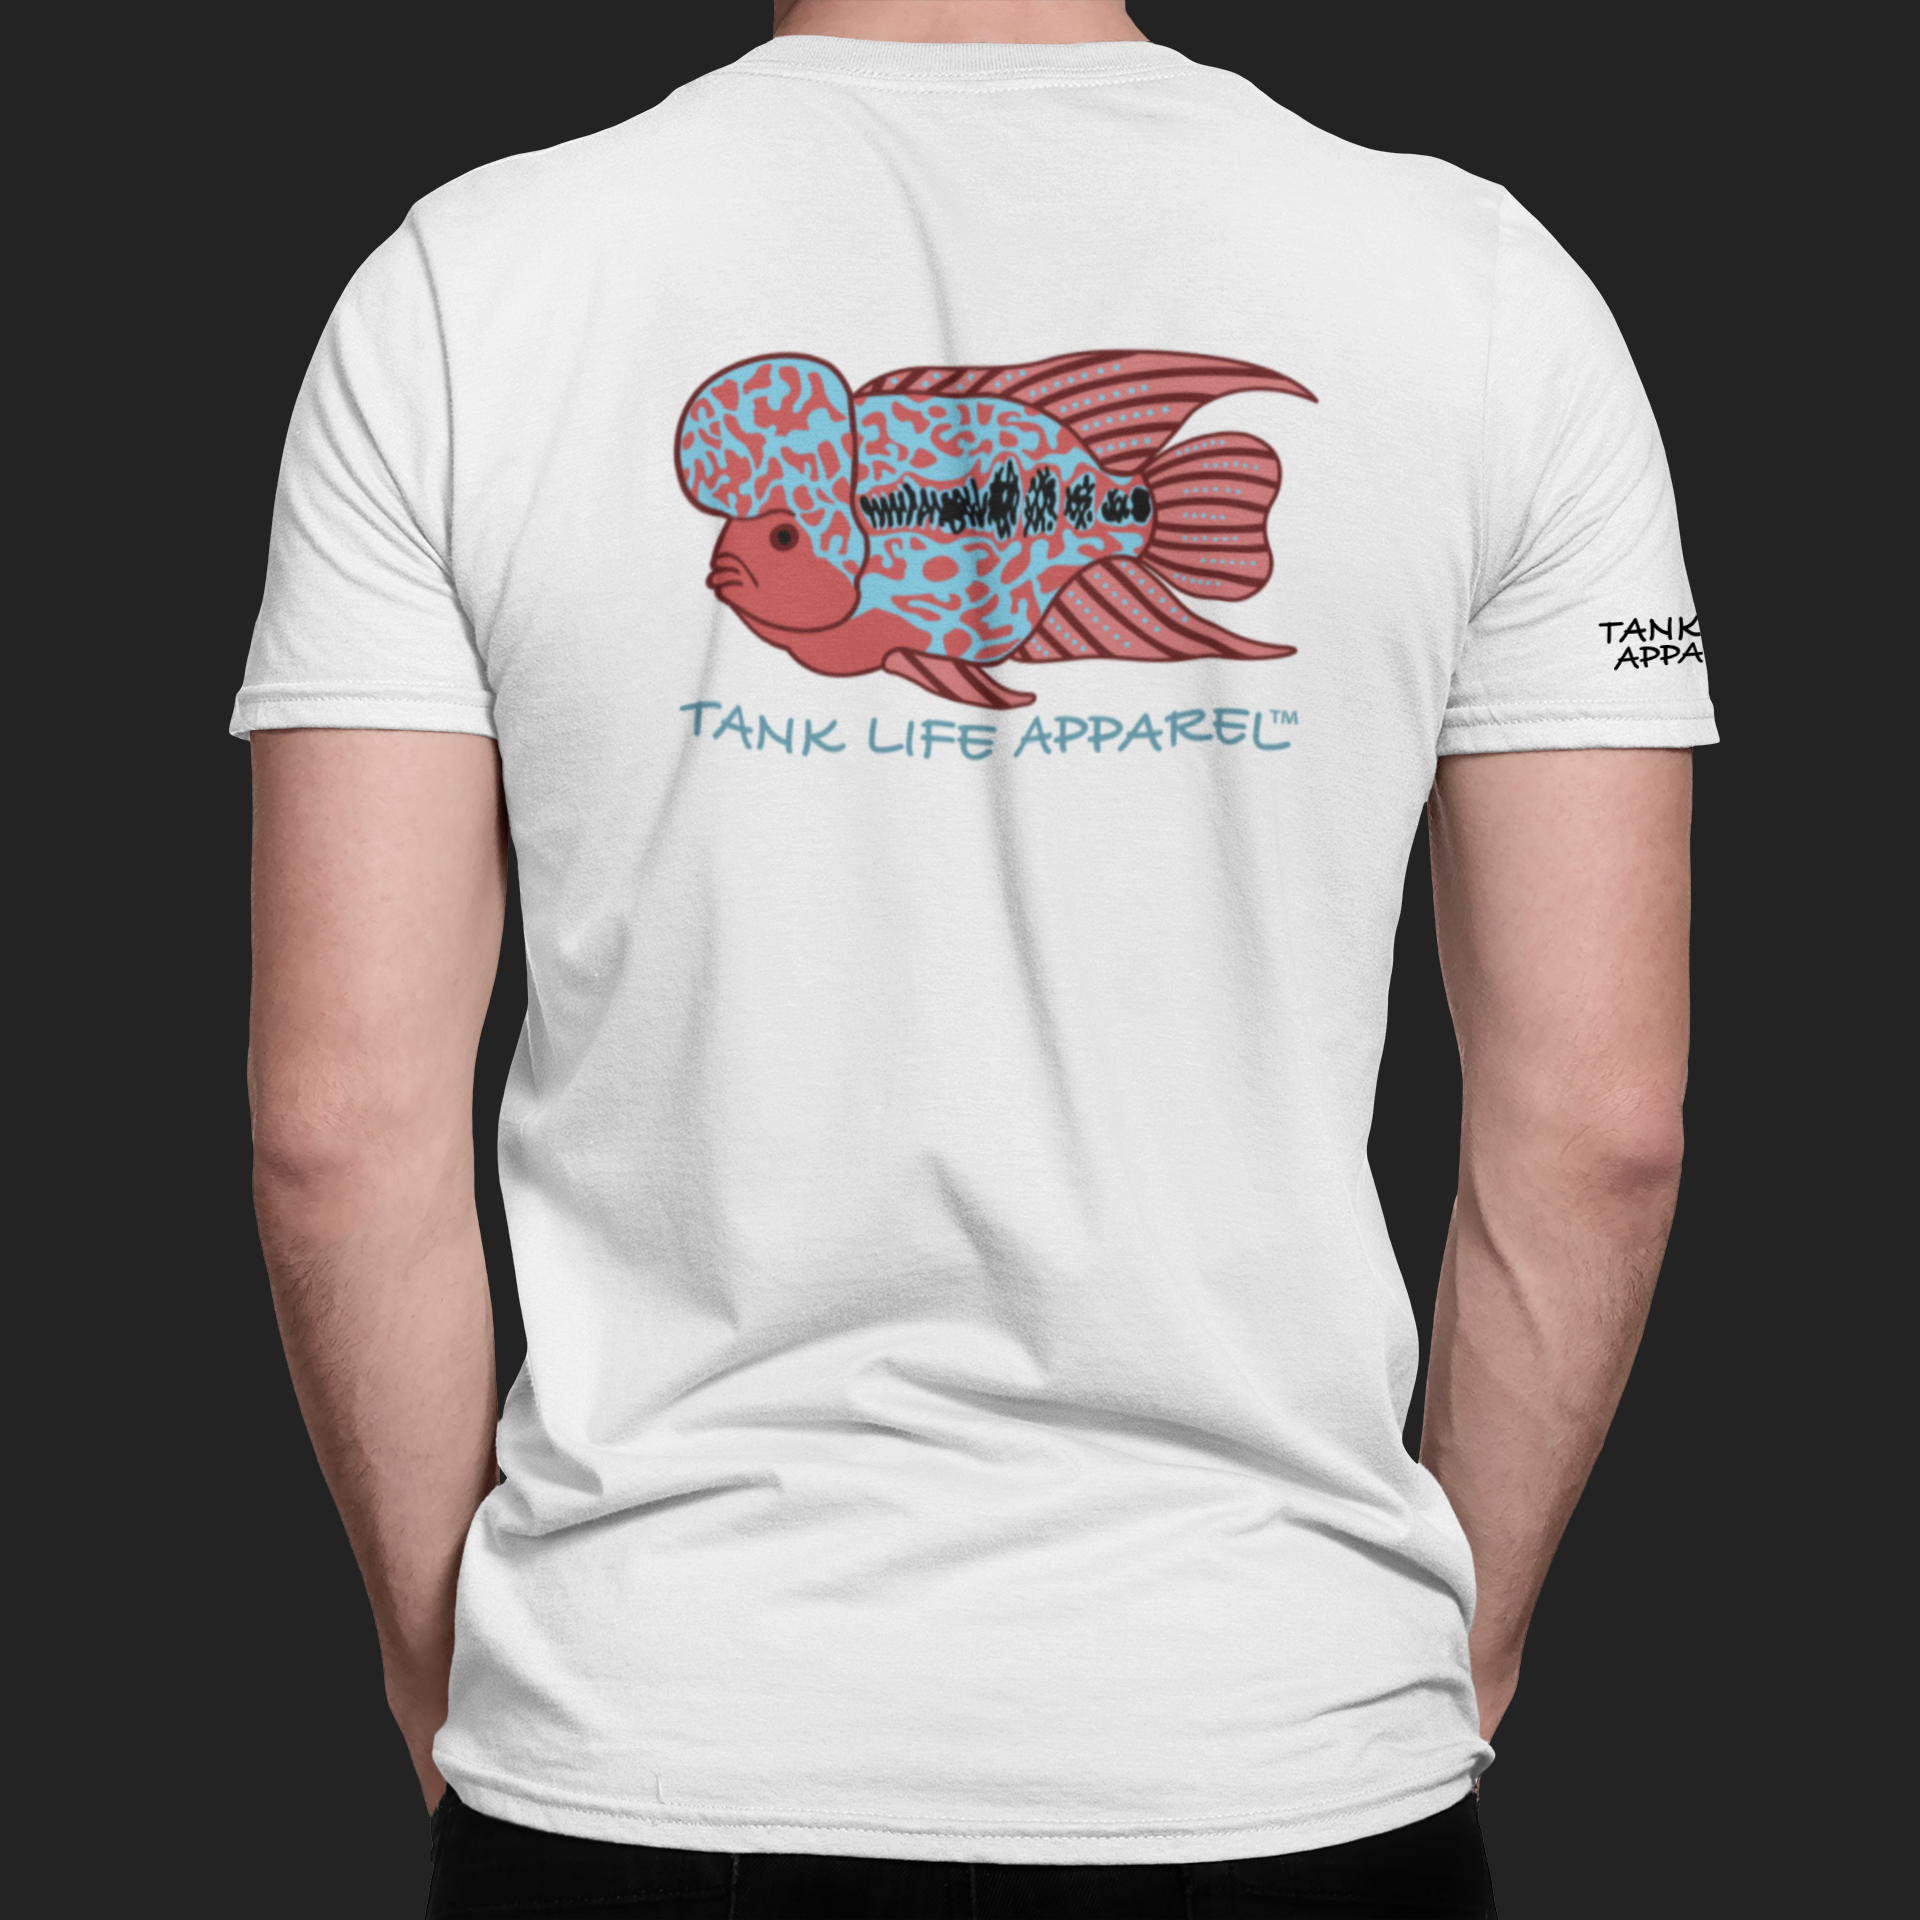 The Tank Life Apparel flowerhorn design on the back of an athletic dri fit performance shirt. Blue and red pink fish with big hump on head.